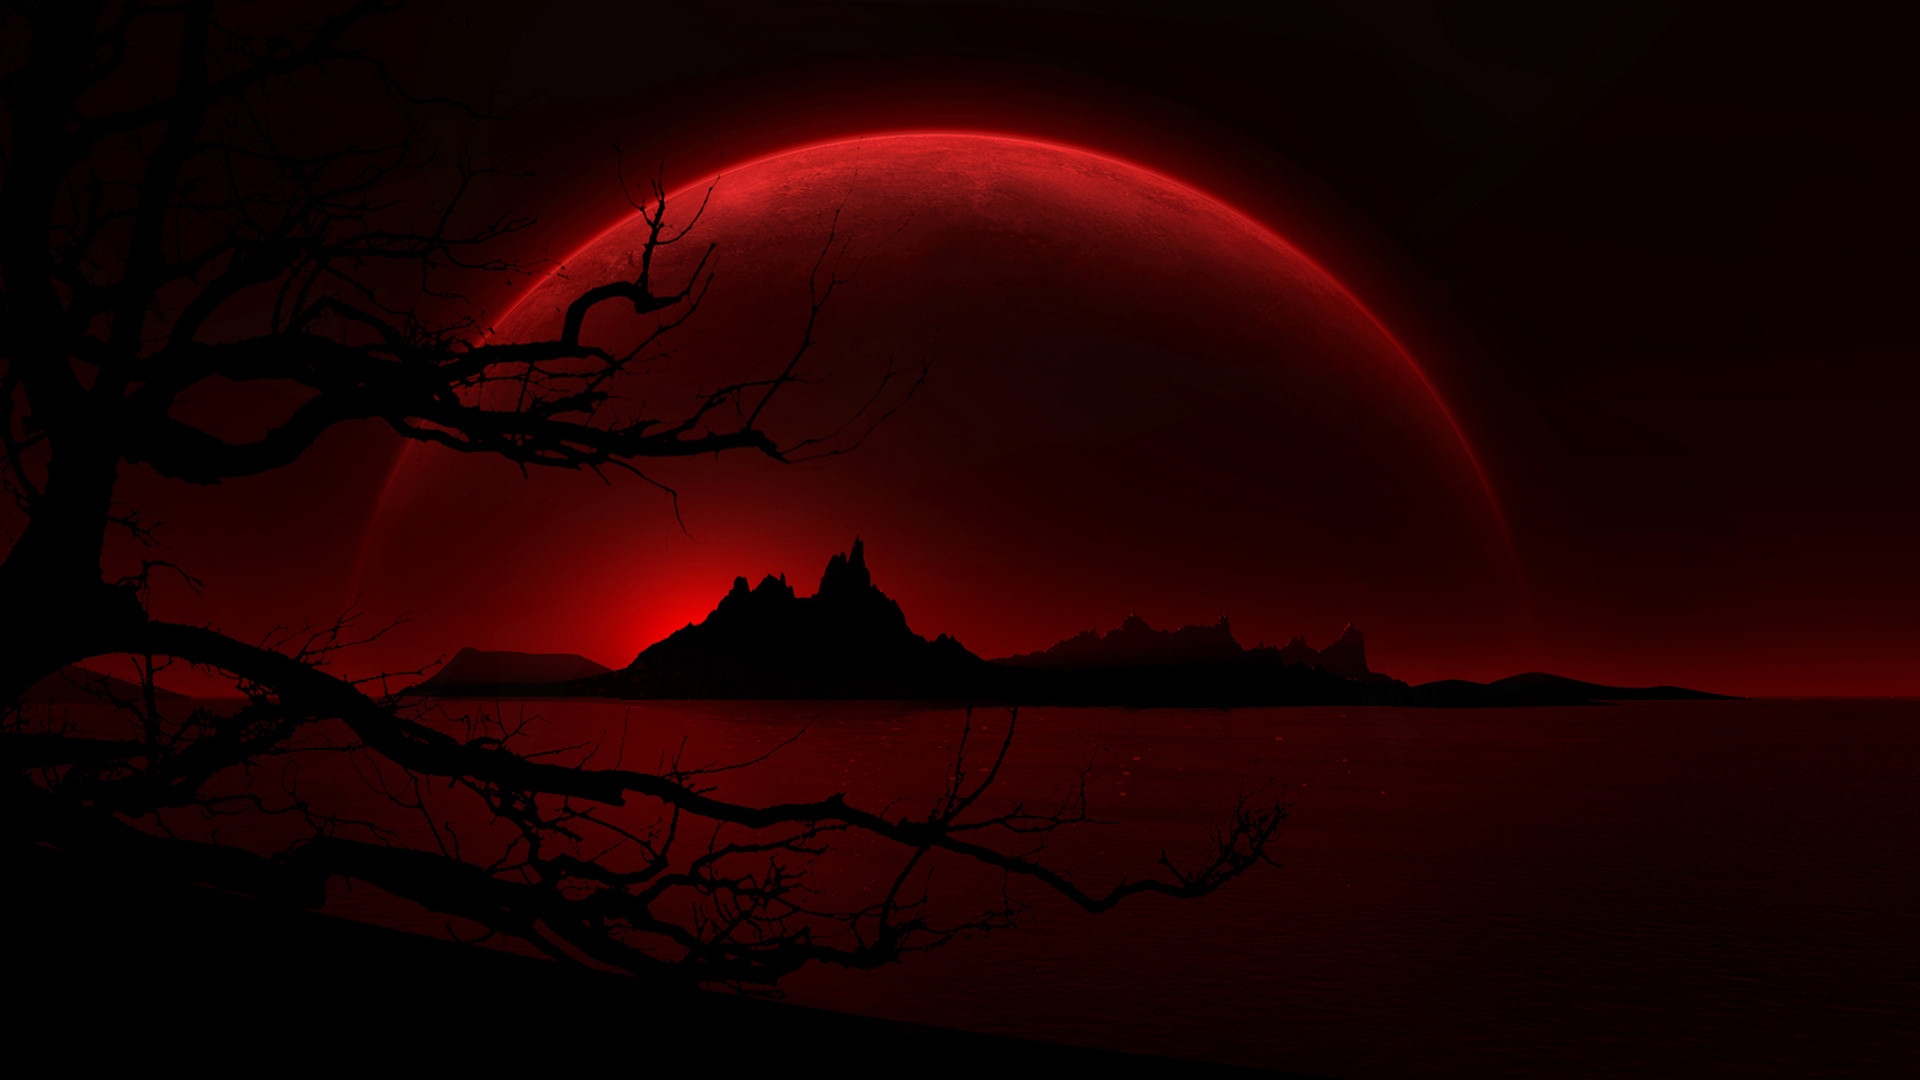 1920x1080 Red moon, Anne stokes and Blood on Pinterest